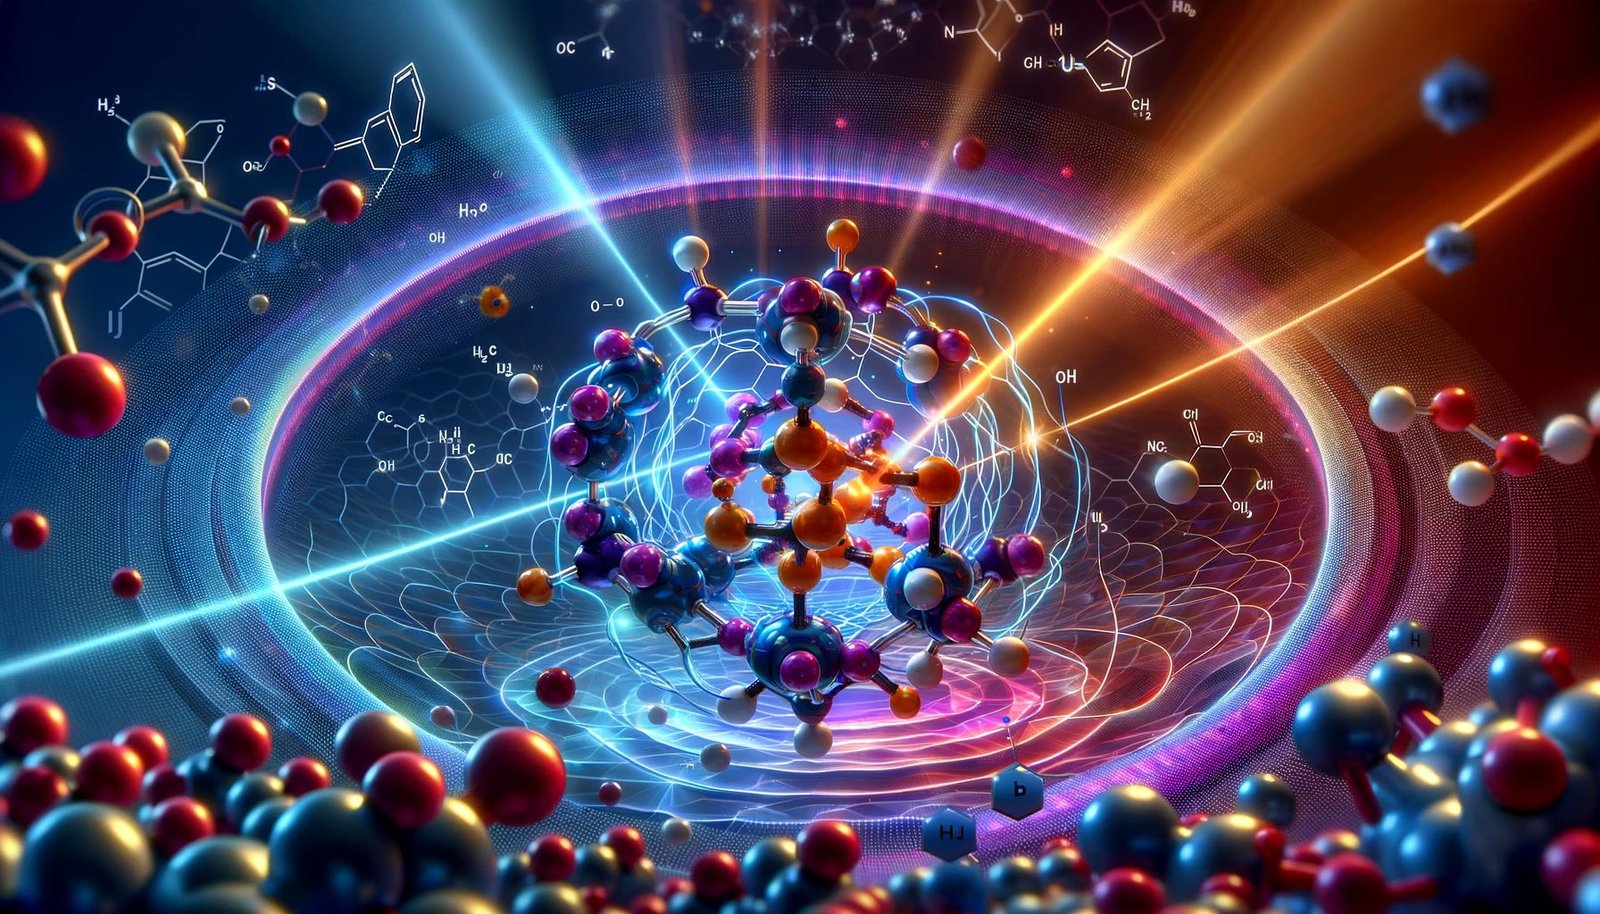 Advanced Spectroscopy Captures Molecular Dynamics in Real-Time